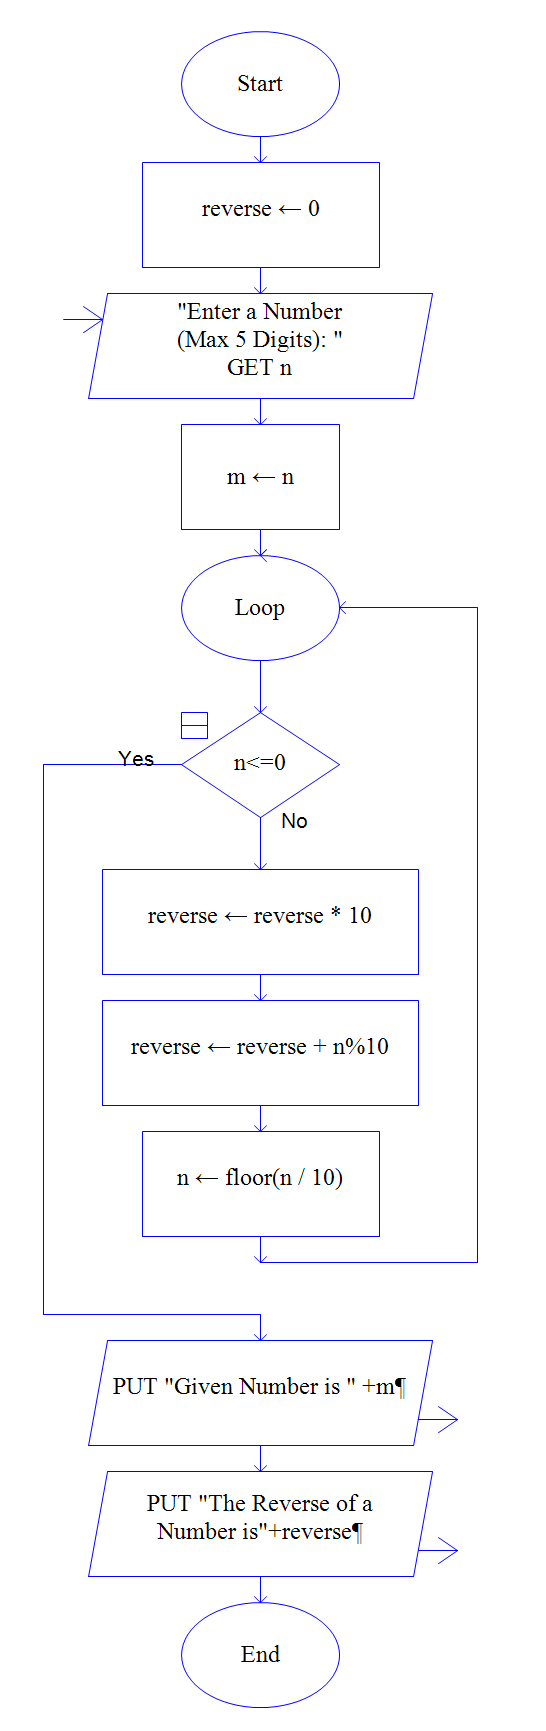 Flowchart for Reverse of a number